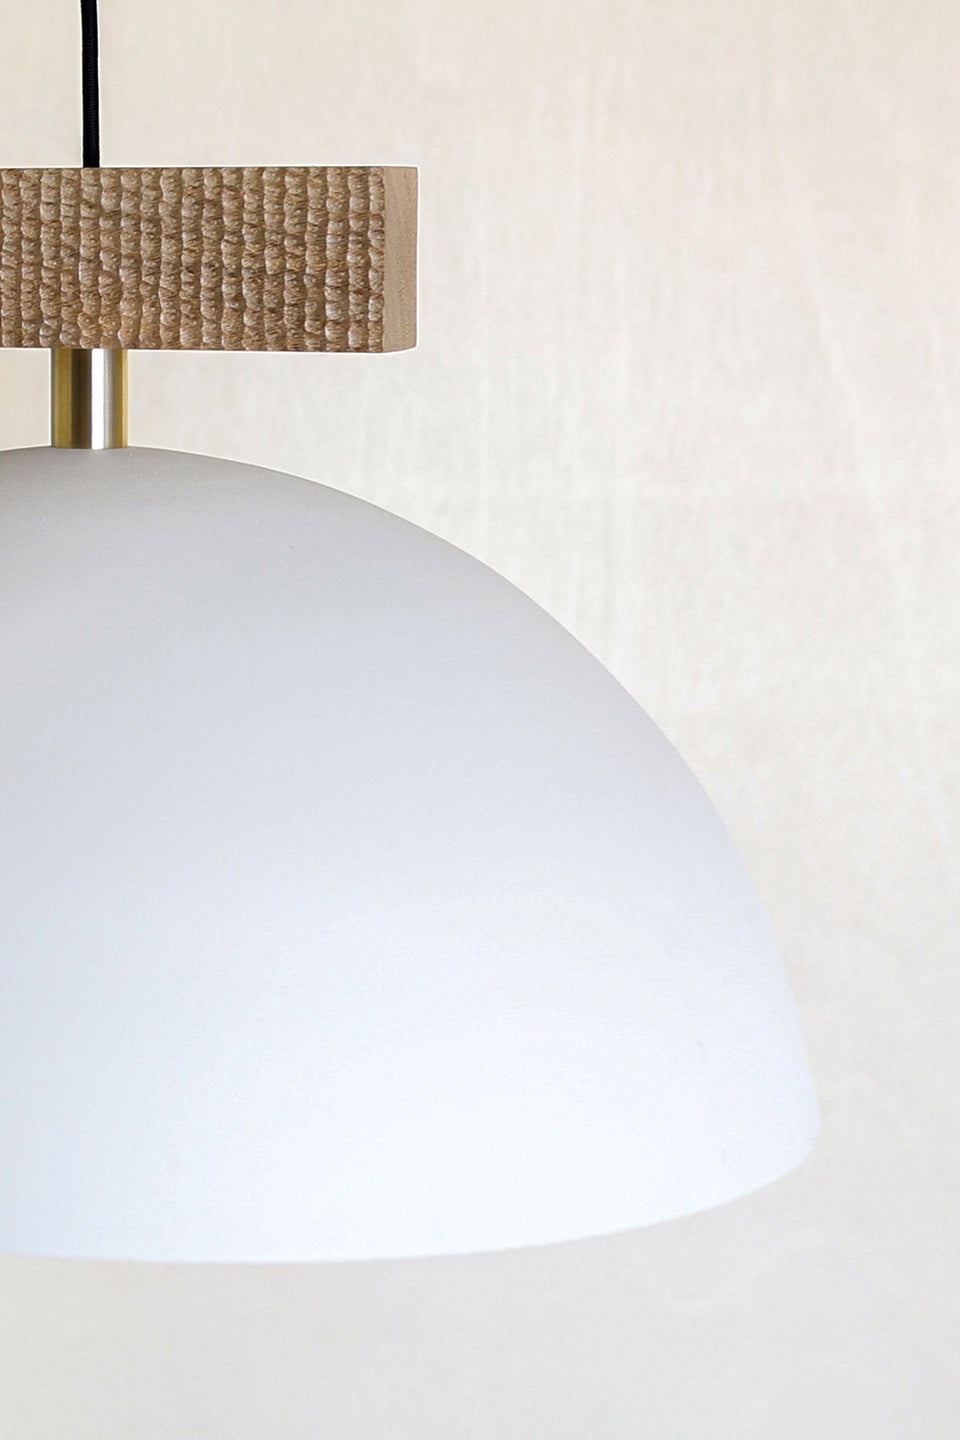 HANGING MOHICAN | Pendant Light